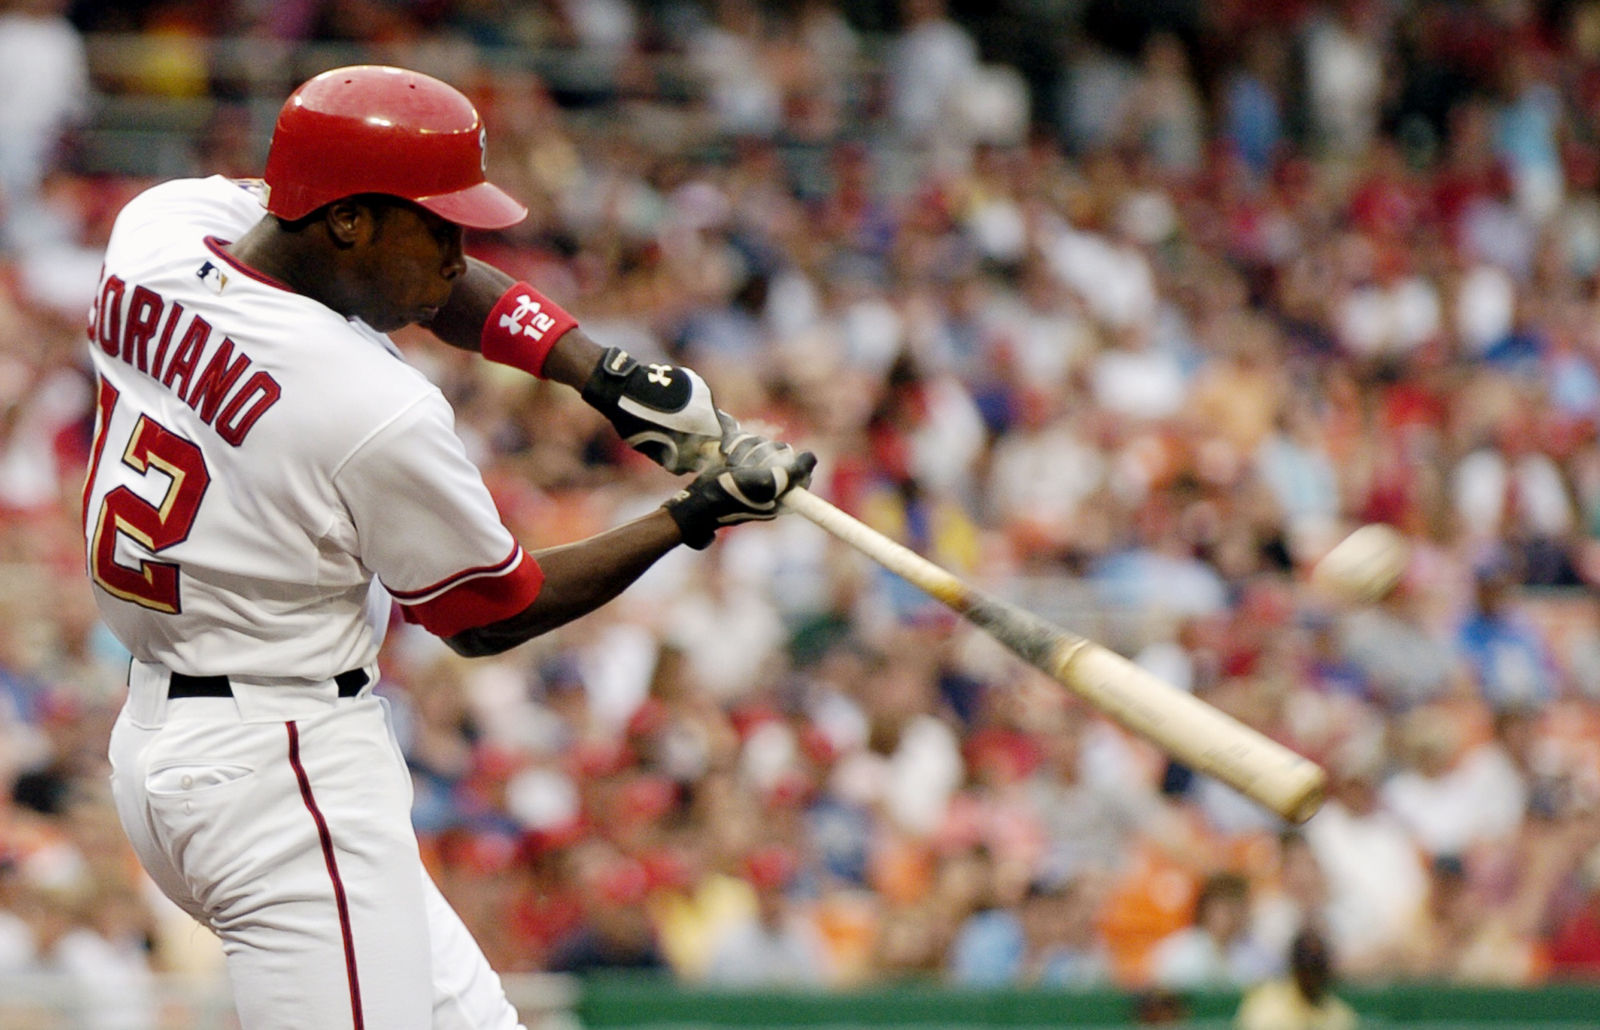 Washington Nationals' Alfonso Soriano hits a solo home run against the San Diego Padres during the first inning of a baseball game Saturday, July 8, 2006 in Washington.(AP Photo/Nick Wass)